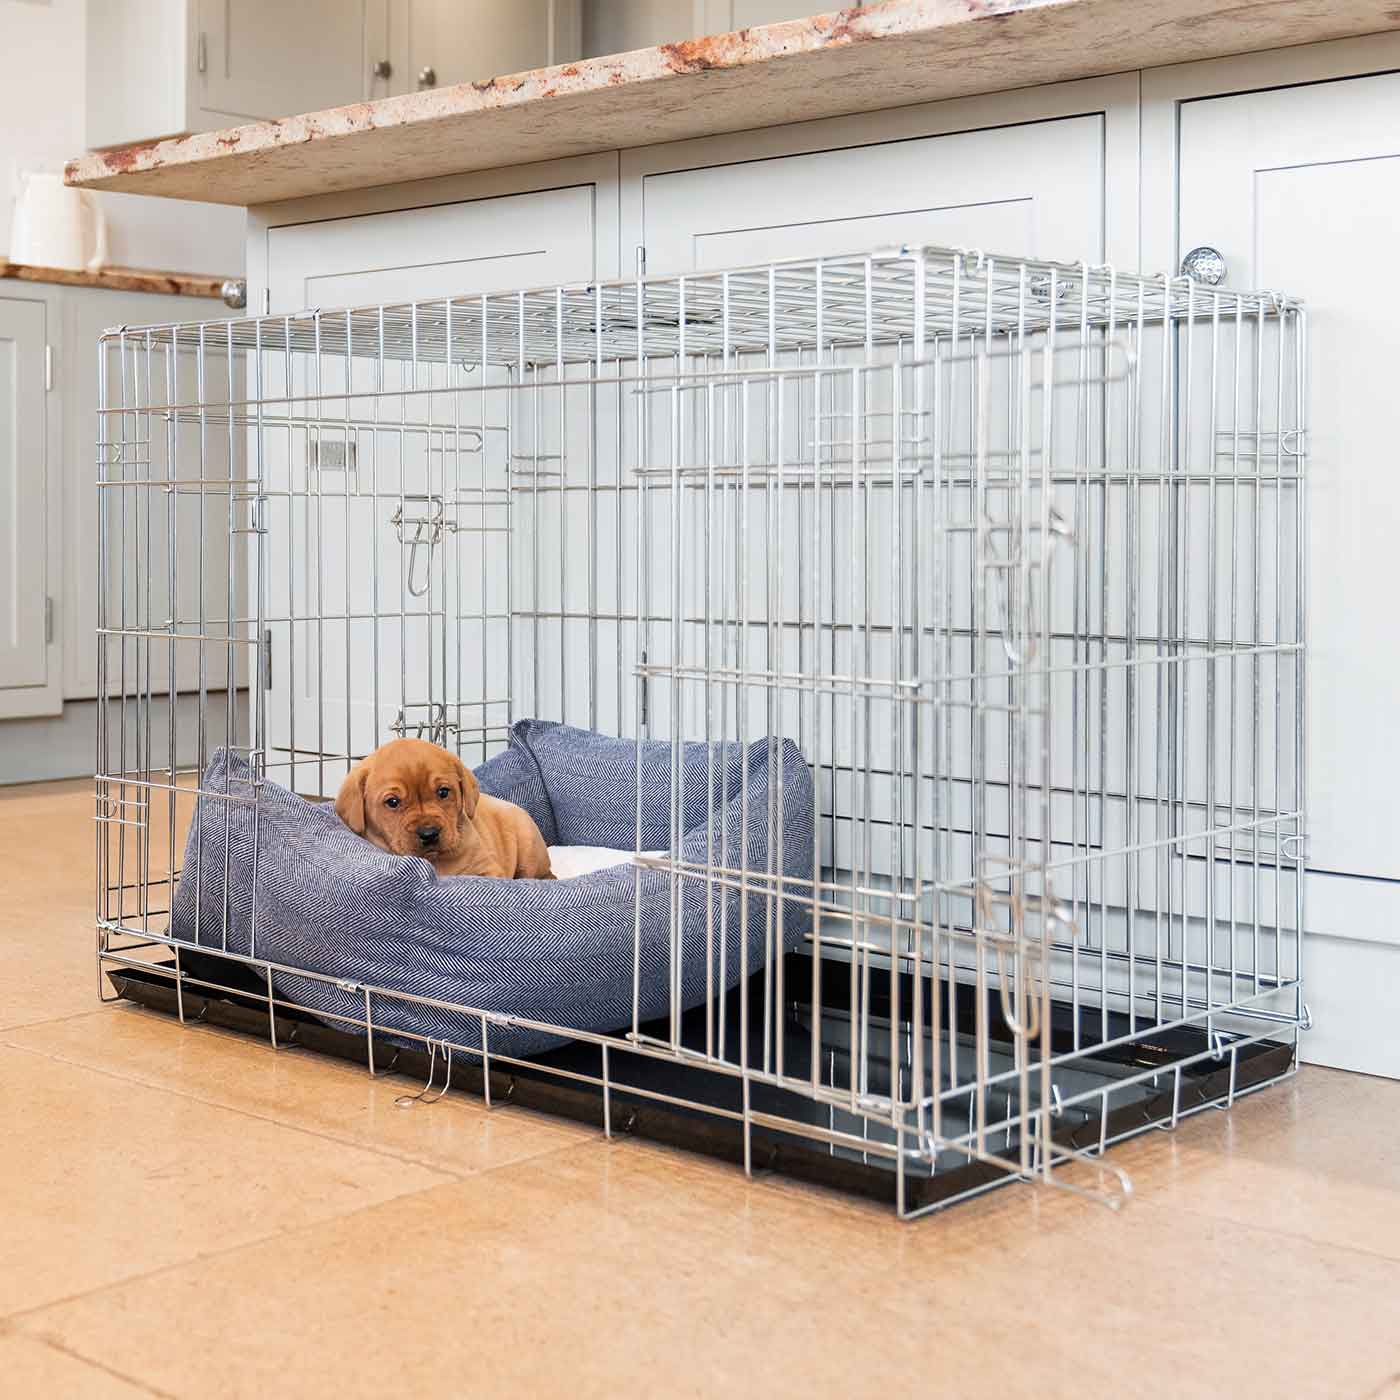 [color:oxford herringbone] Cozy & Calm Puppy Cage Bed, The Perfect Dog Cage Accessory For The Ultimate Dog Den! In Stunning Oxford Herringbone! Now Available to Personalize at Lords & Labradors US